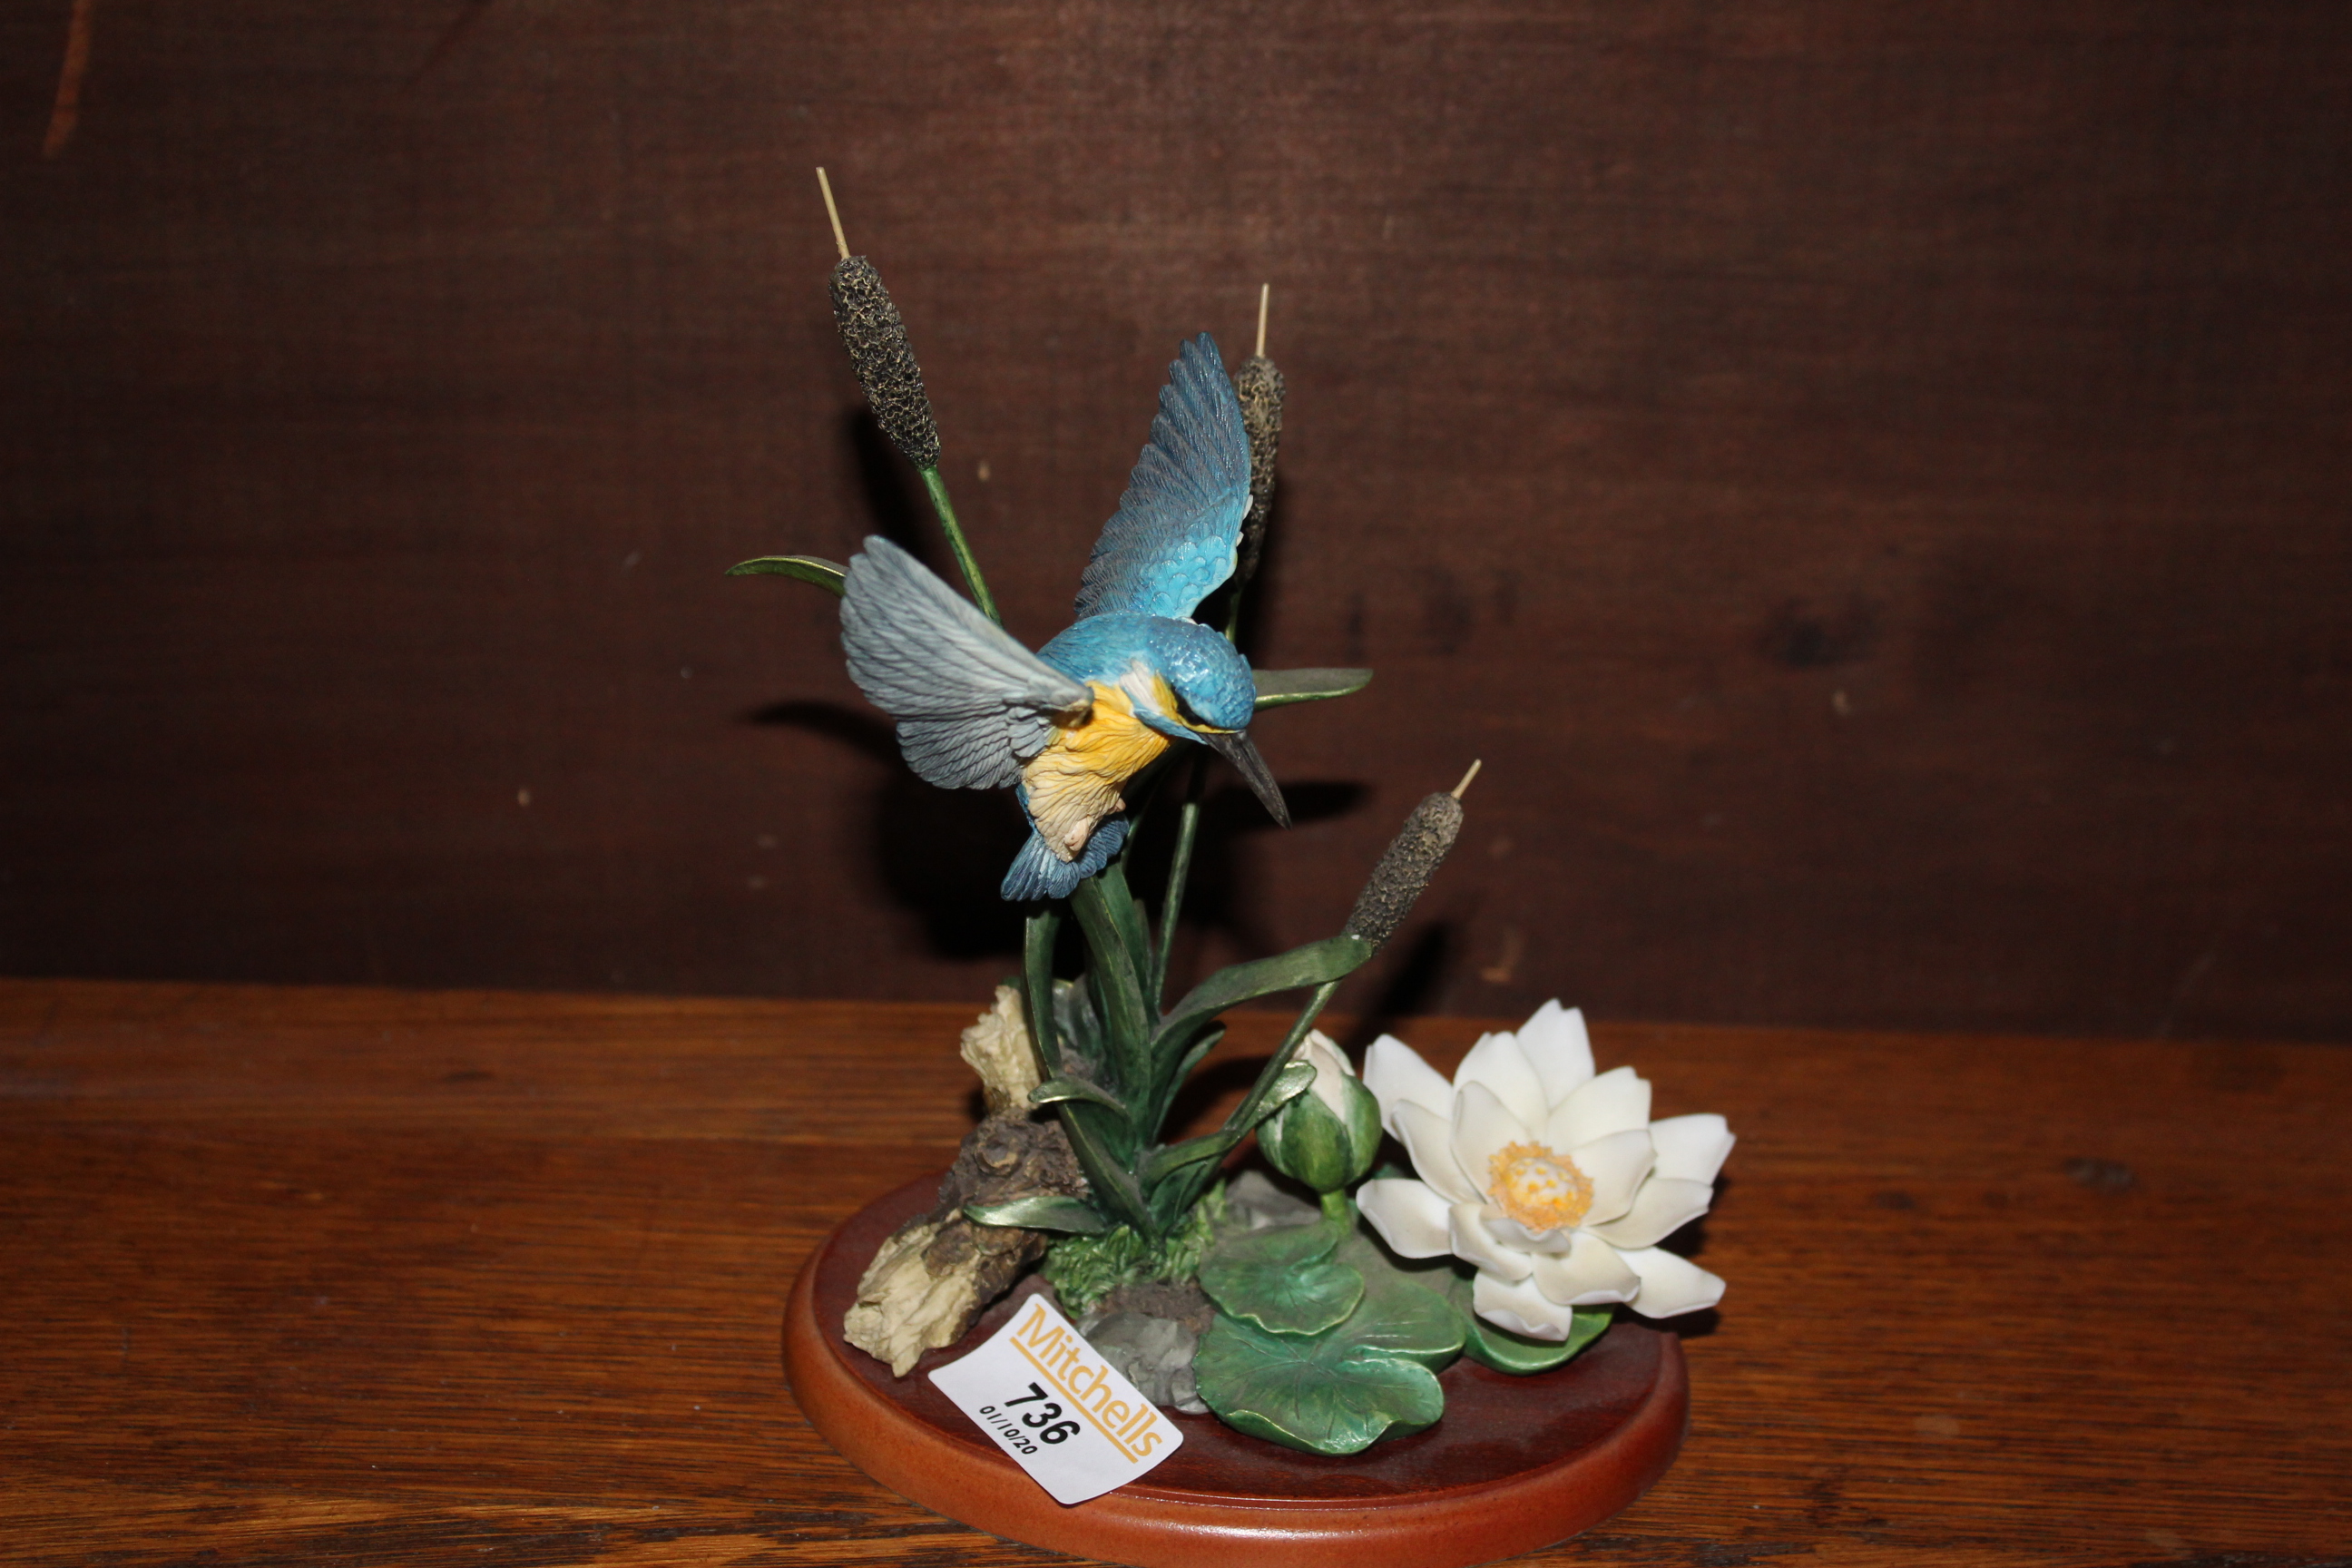 A Border Fine Arts resin figure "Kingfishers", model by Russell Willis A3459, 18 cm high.